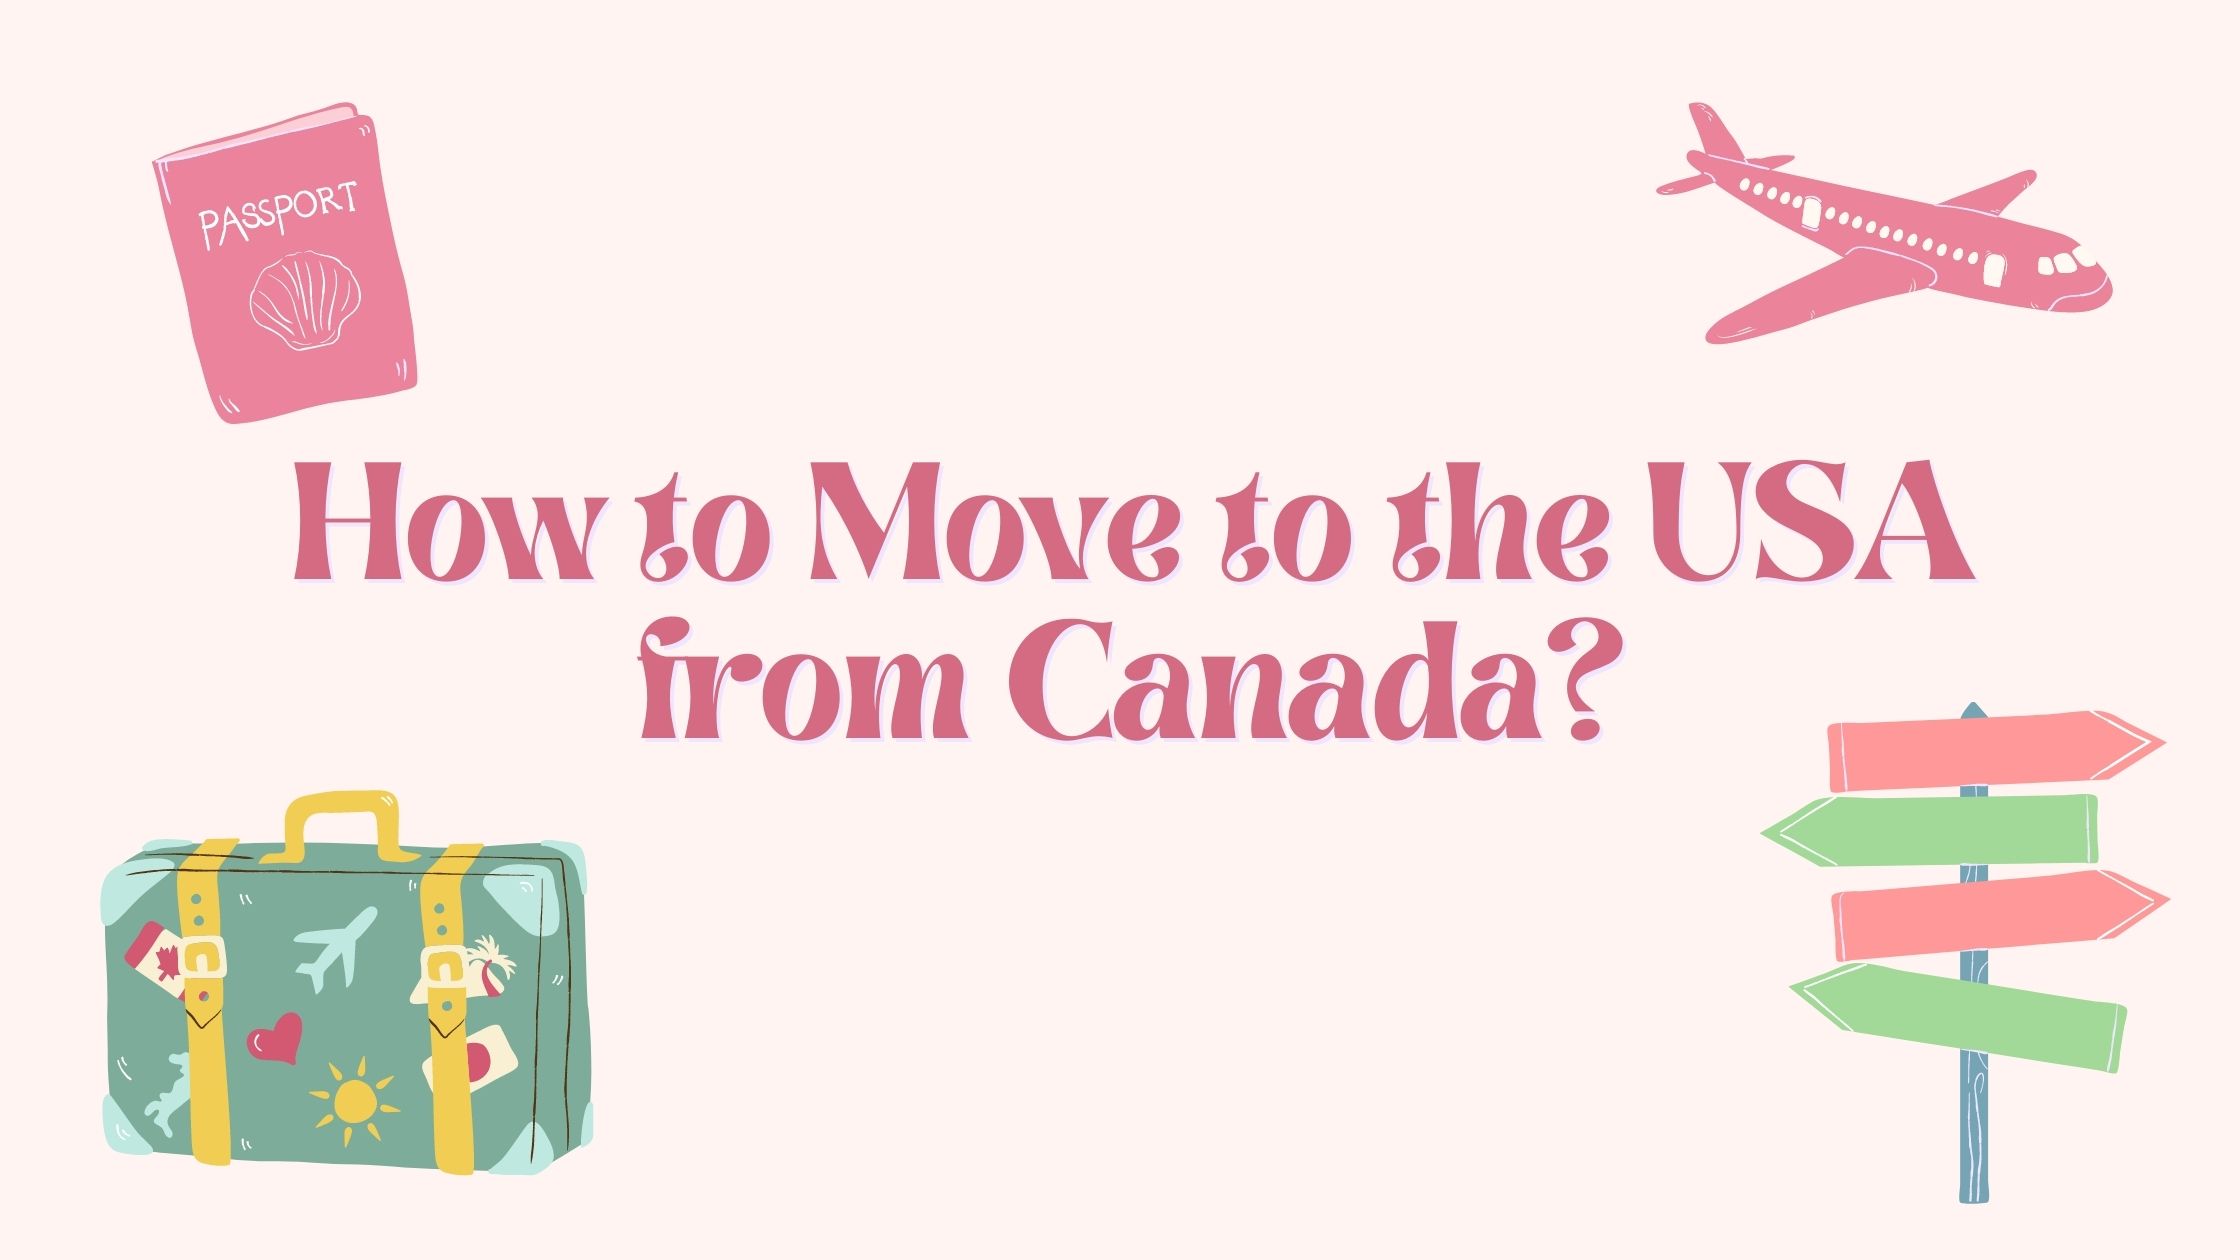 How to move to the USA from Canada